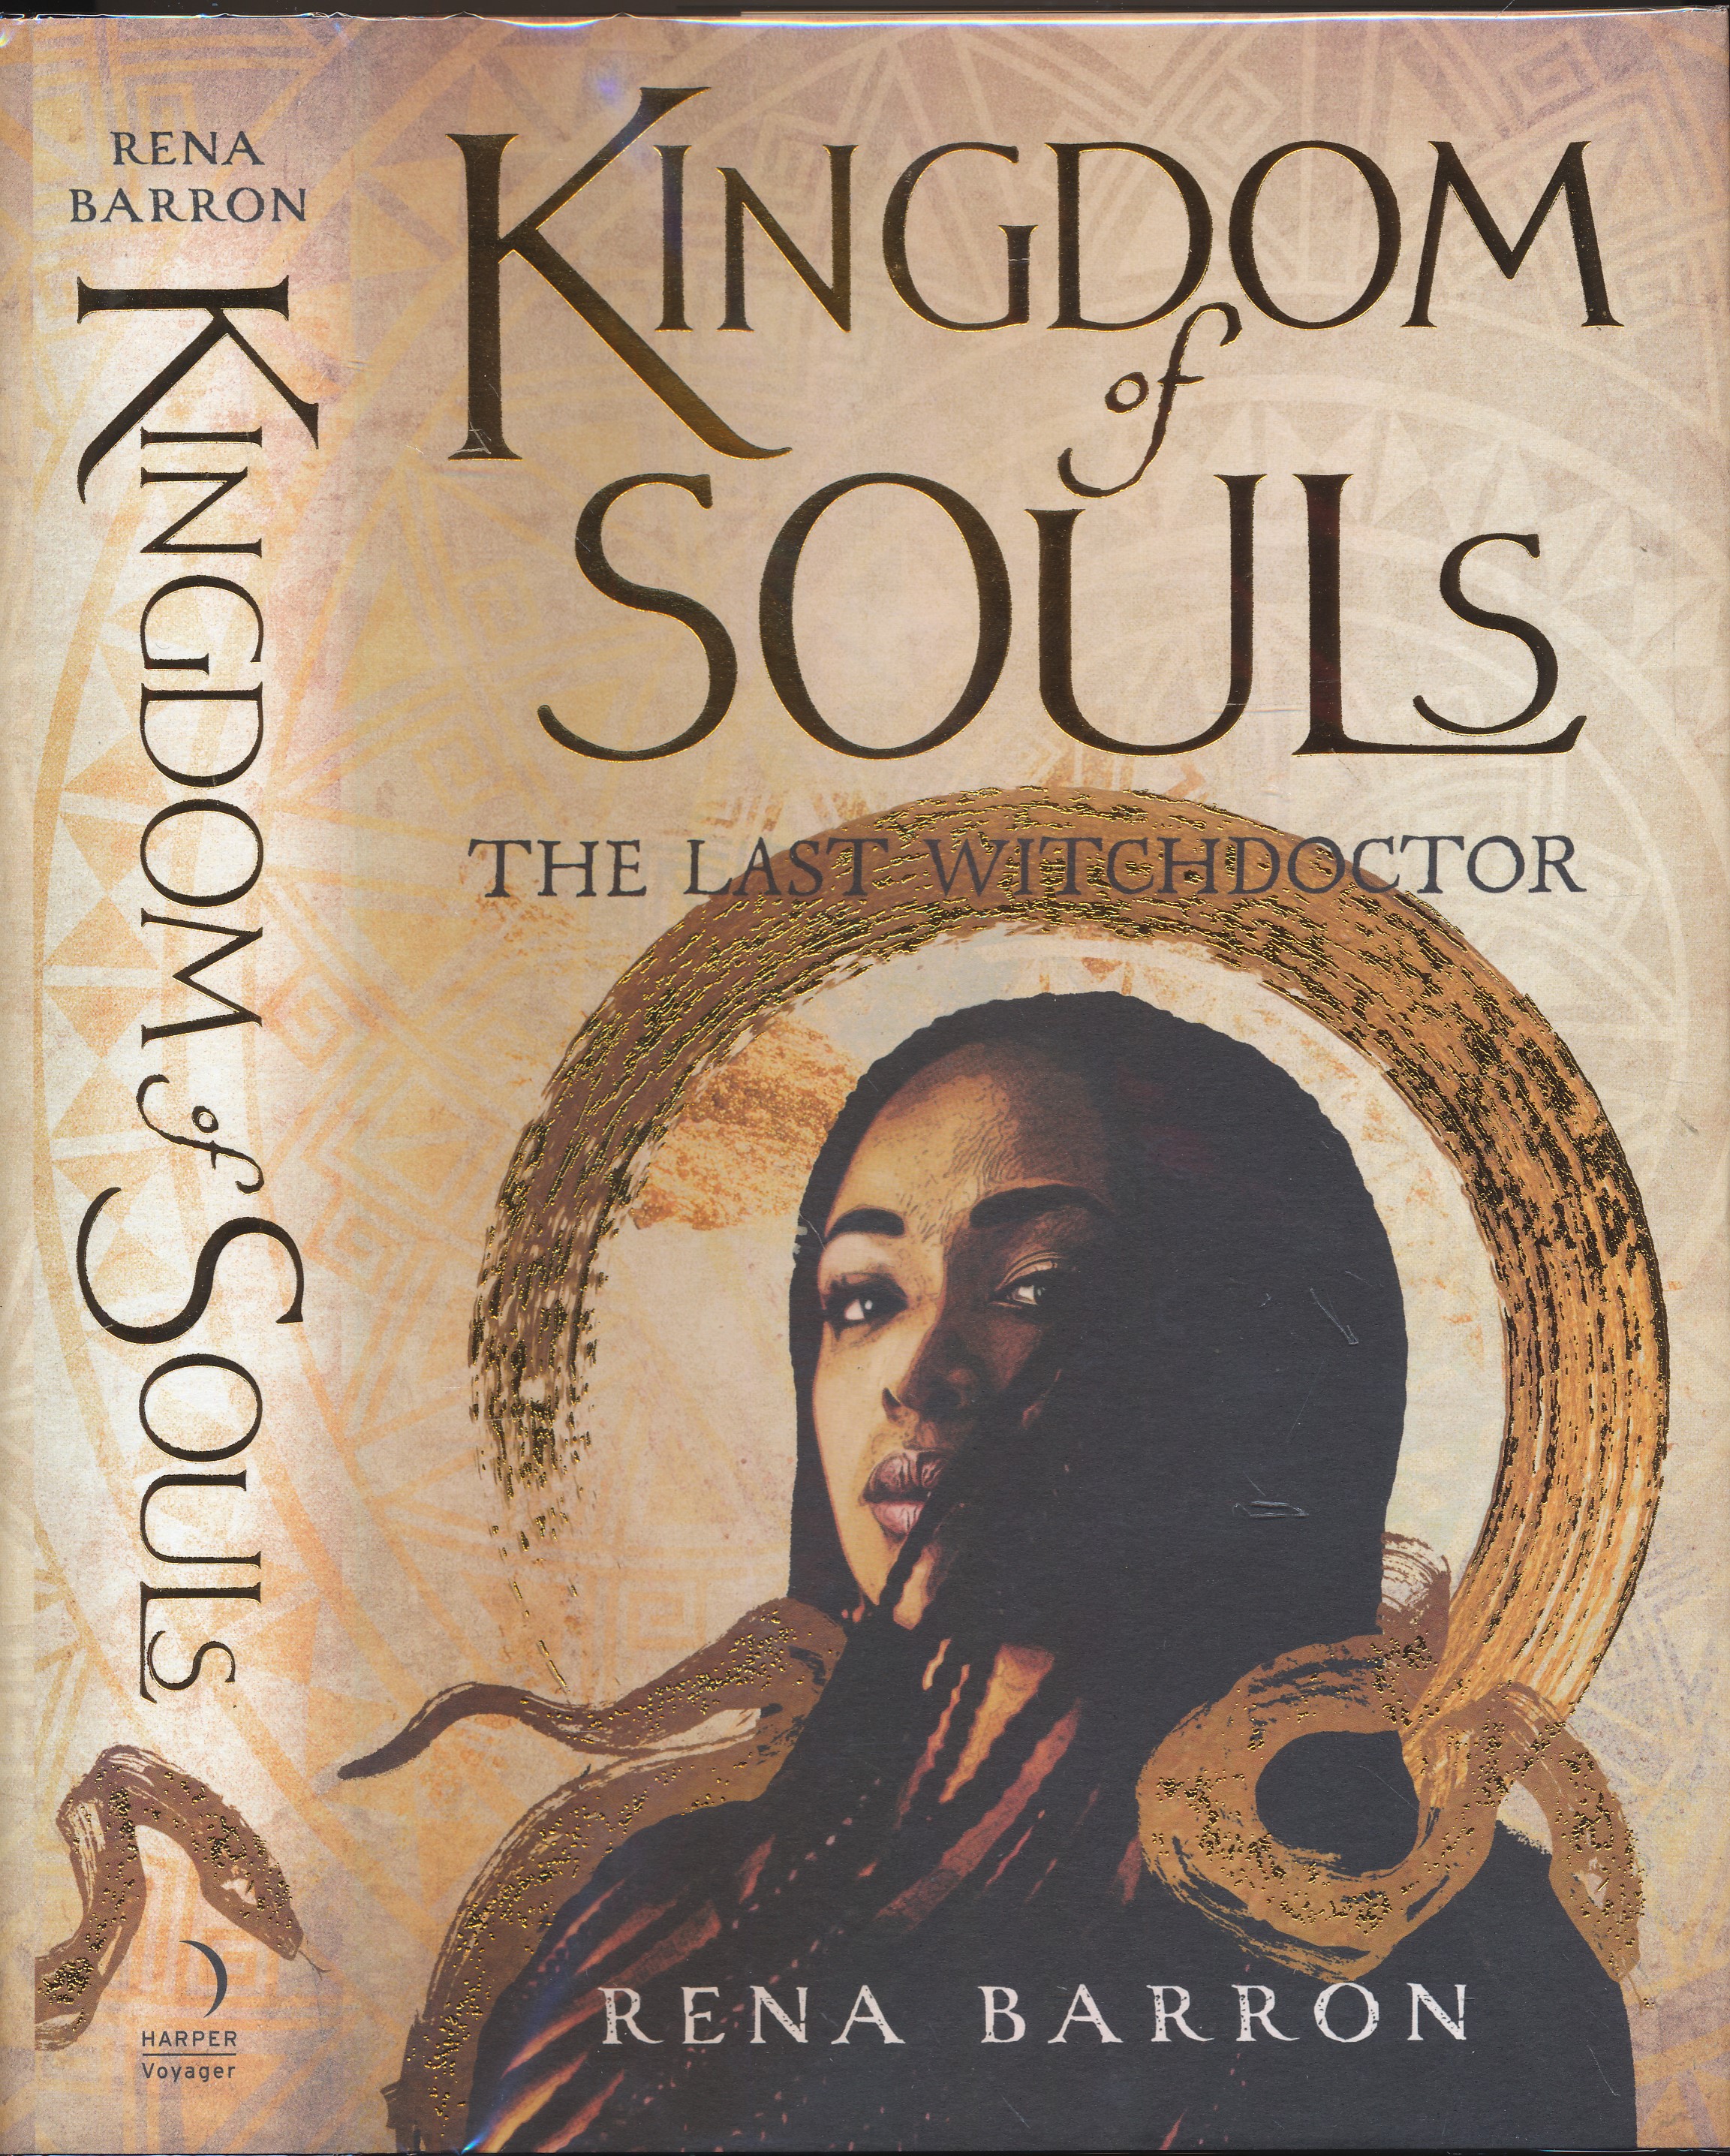 Kingdom of Souls. The Last Witchdoctor. Signed Limited edition.